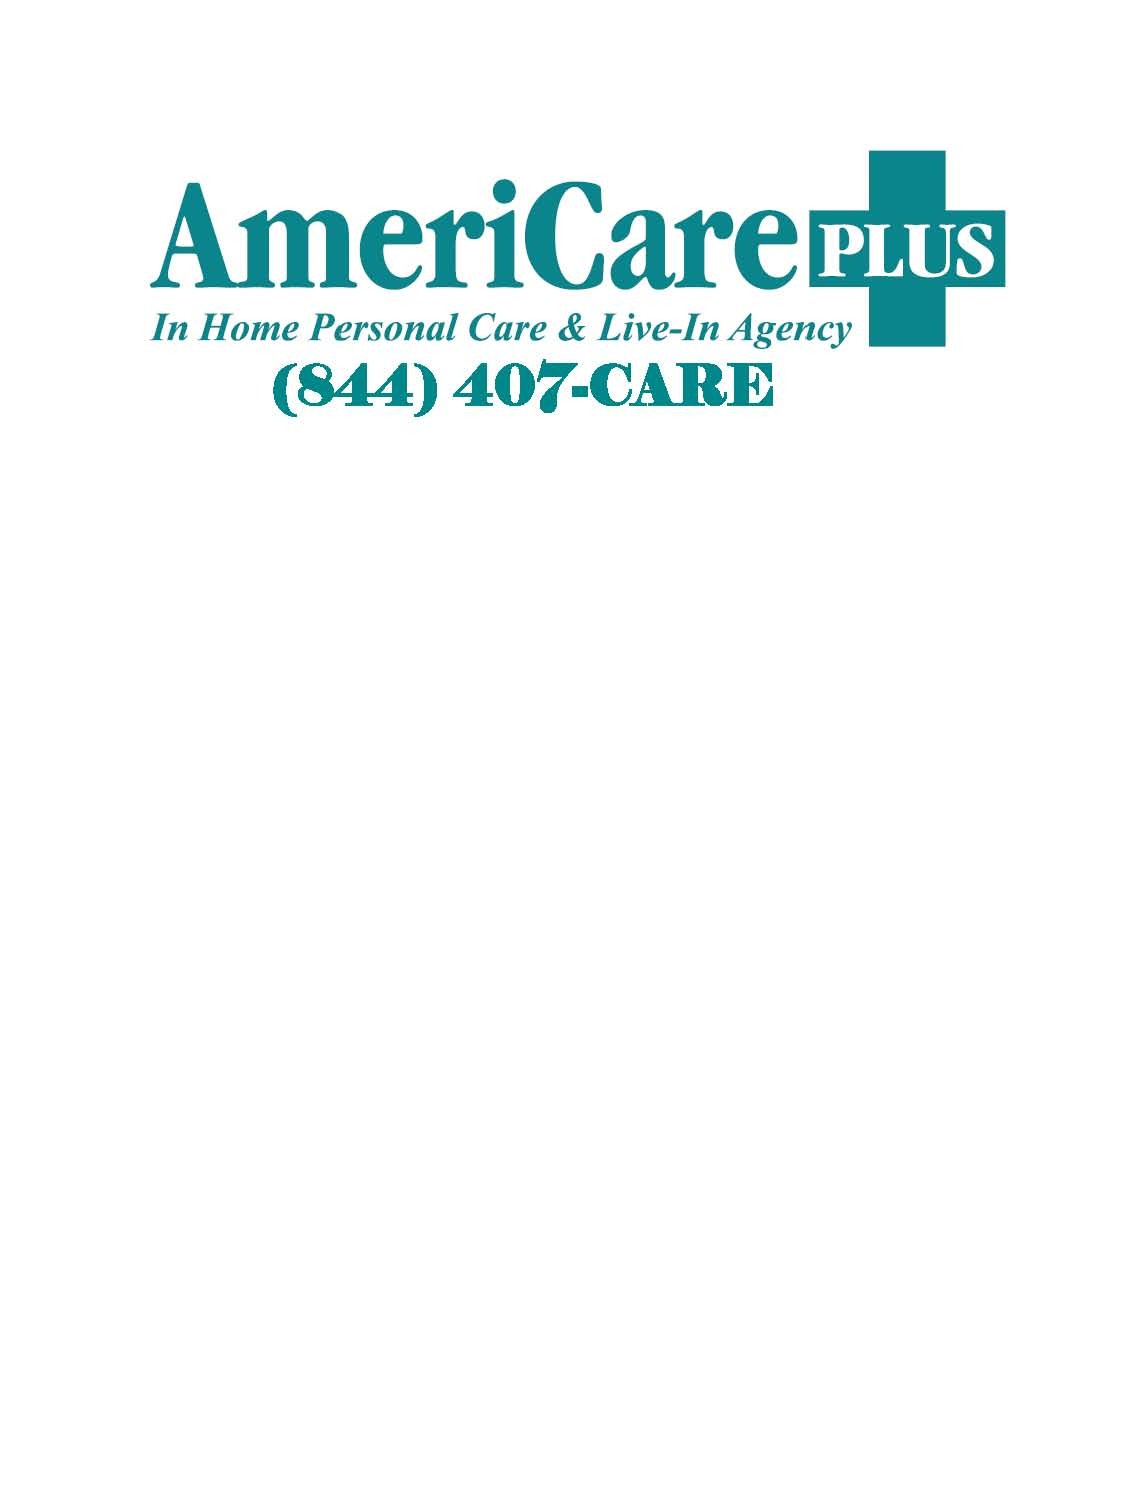 AmeriCare Plus Logo-Please add to Logo area like you all did last year.